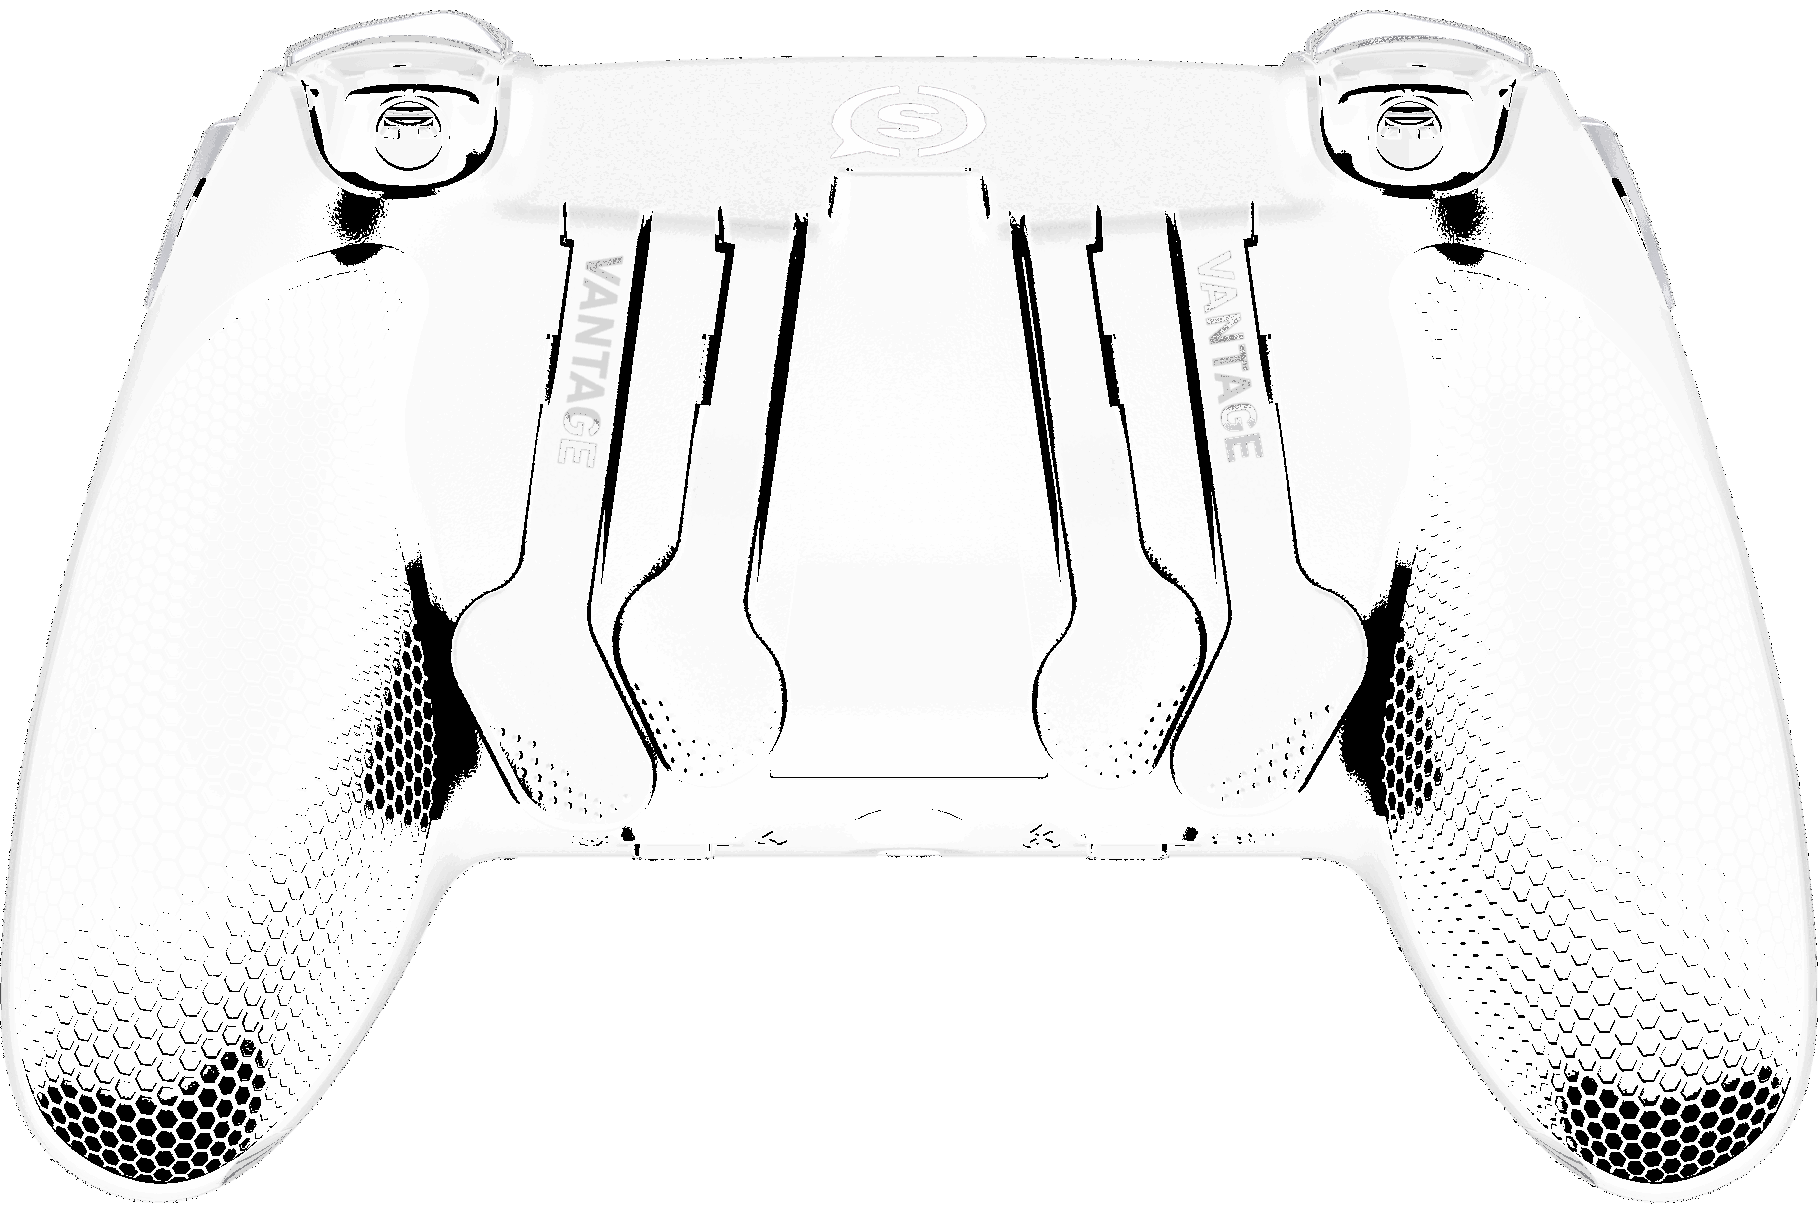 SCUF Vantage Wireless Controller For PS4 | Scuf Gaming